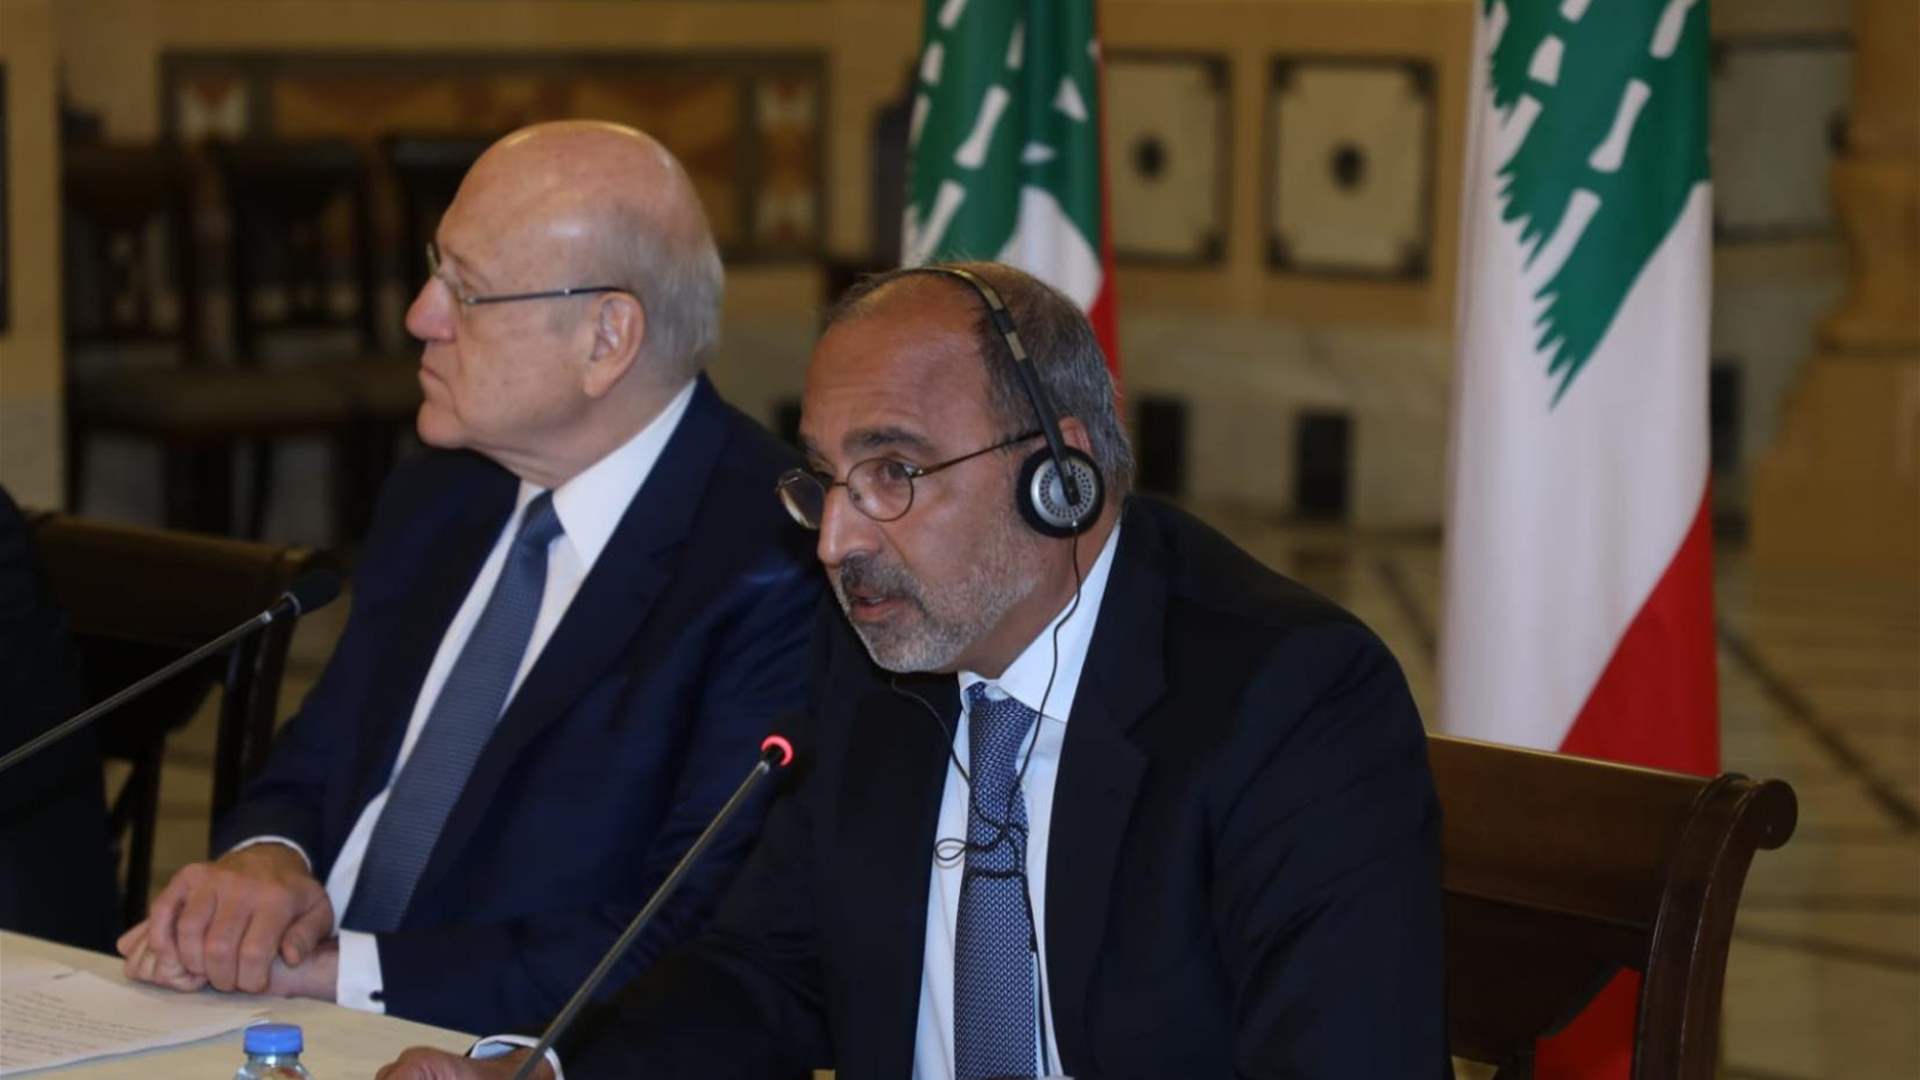 Lebanese Prime Minister and UN Coordinator discuss Syrian refugee crisis